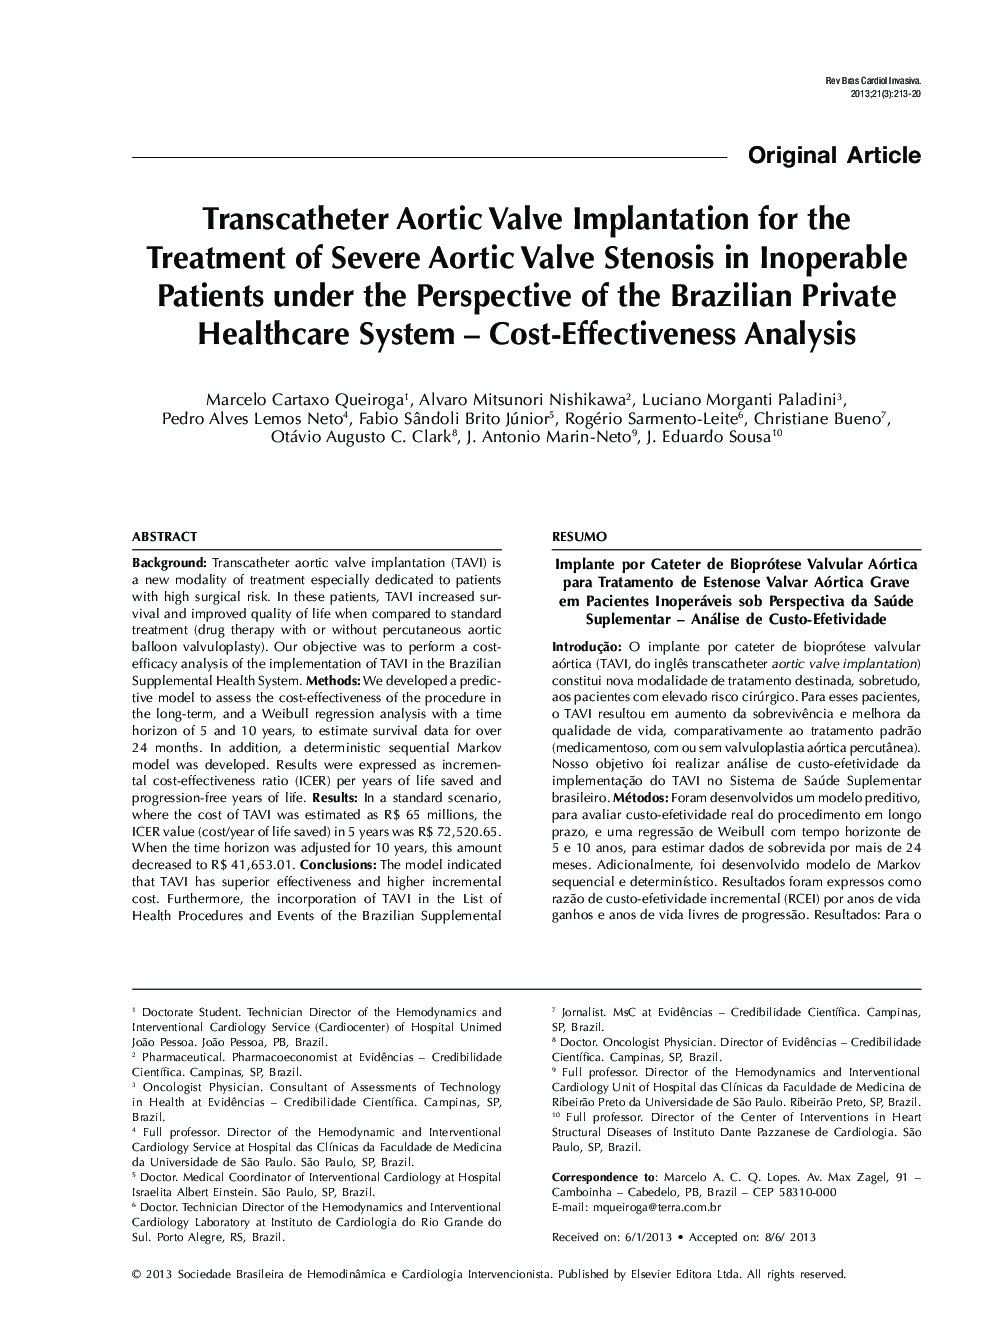 Transcatheter Aortic Valve Implantation for the Treatment of Severe Aortic Valve Stenosis in Inoperable Patients under the Perspective of the Brazilian Private Healthcare System – Cost-Effectiveness Analysis